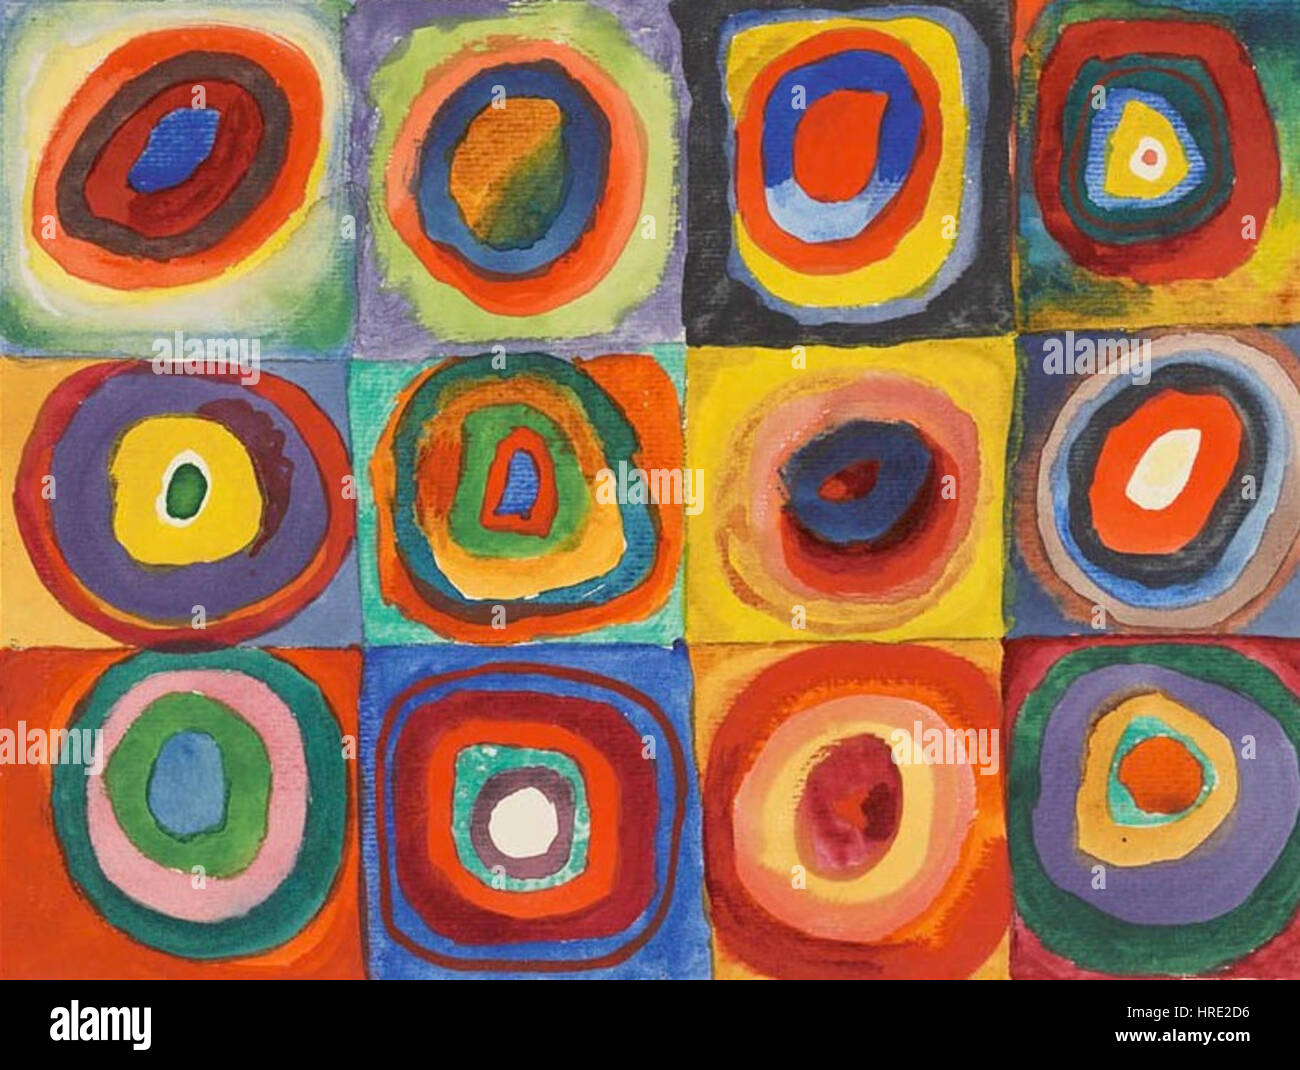 Vassily Kandinsky, 1913 - Color Study, Squares with Concentric Circles Stock Photo